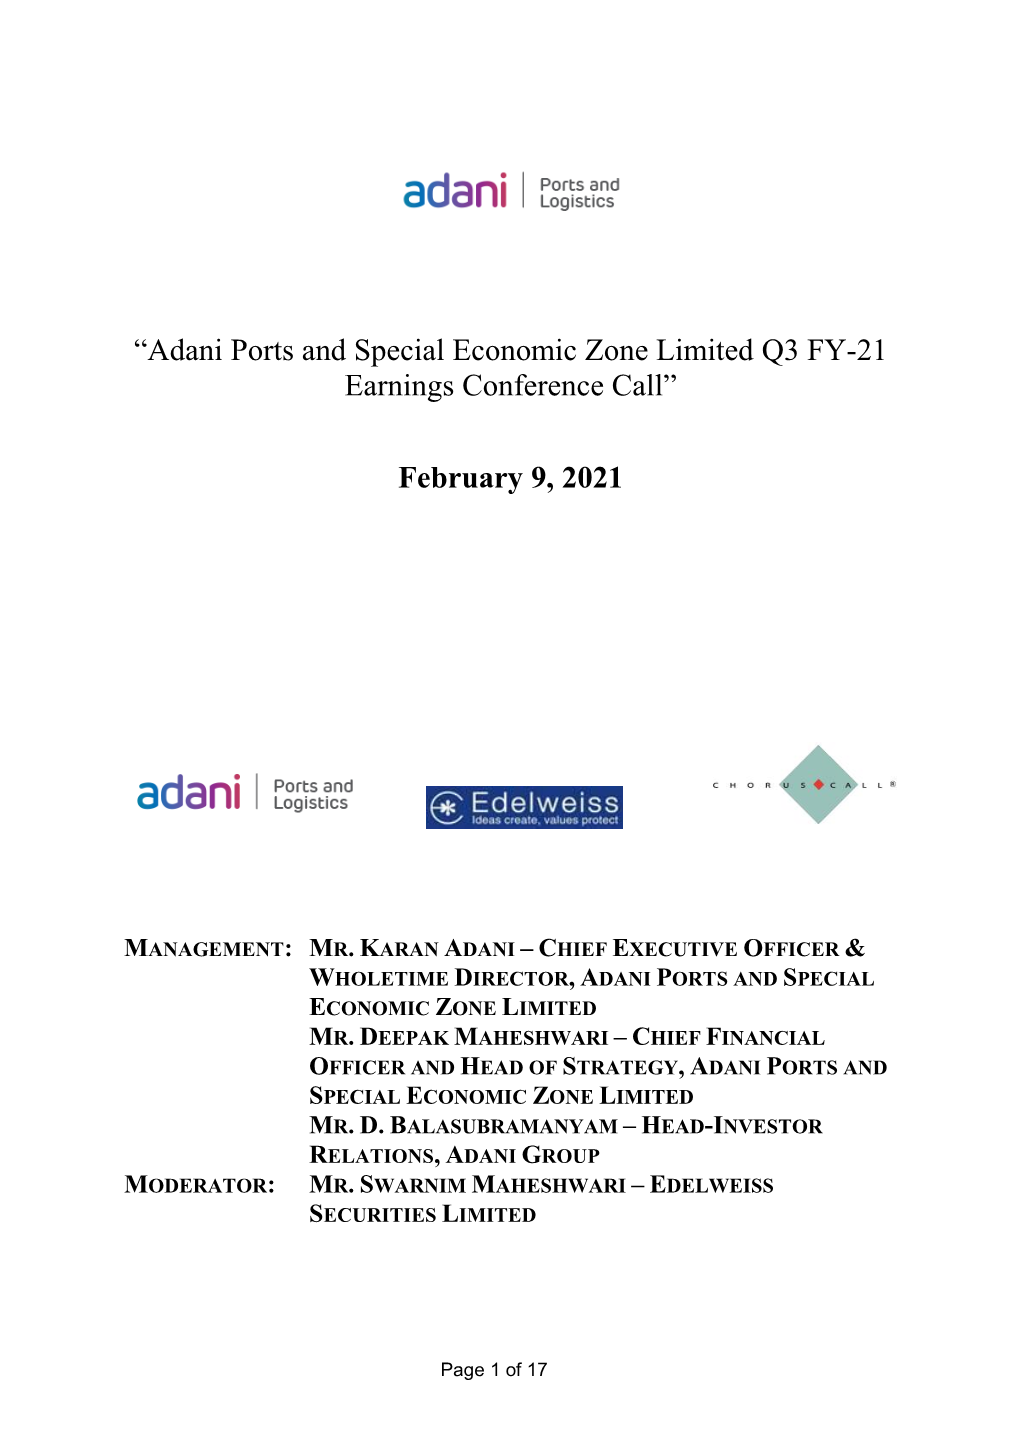 “Adani Ports and Special Economic Zone Limited Q3 FY-21 Earnings Conference Call”